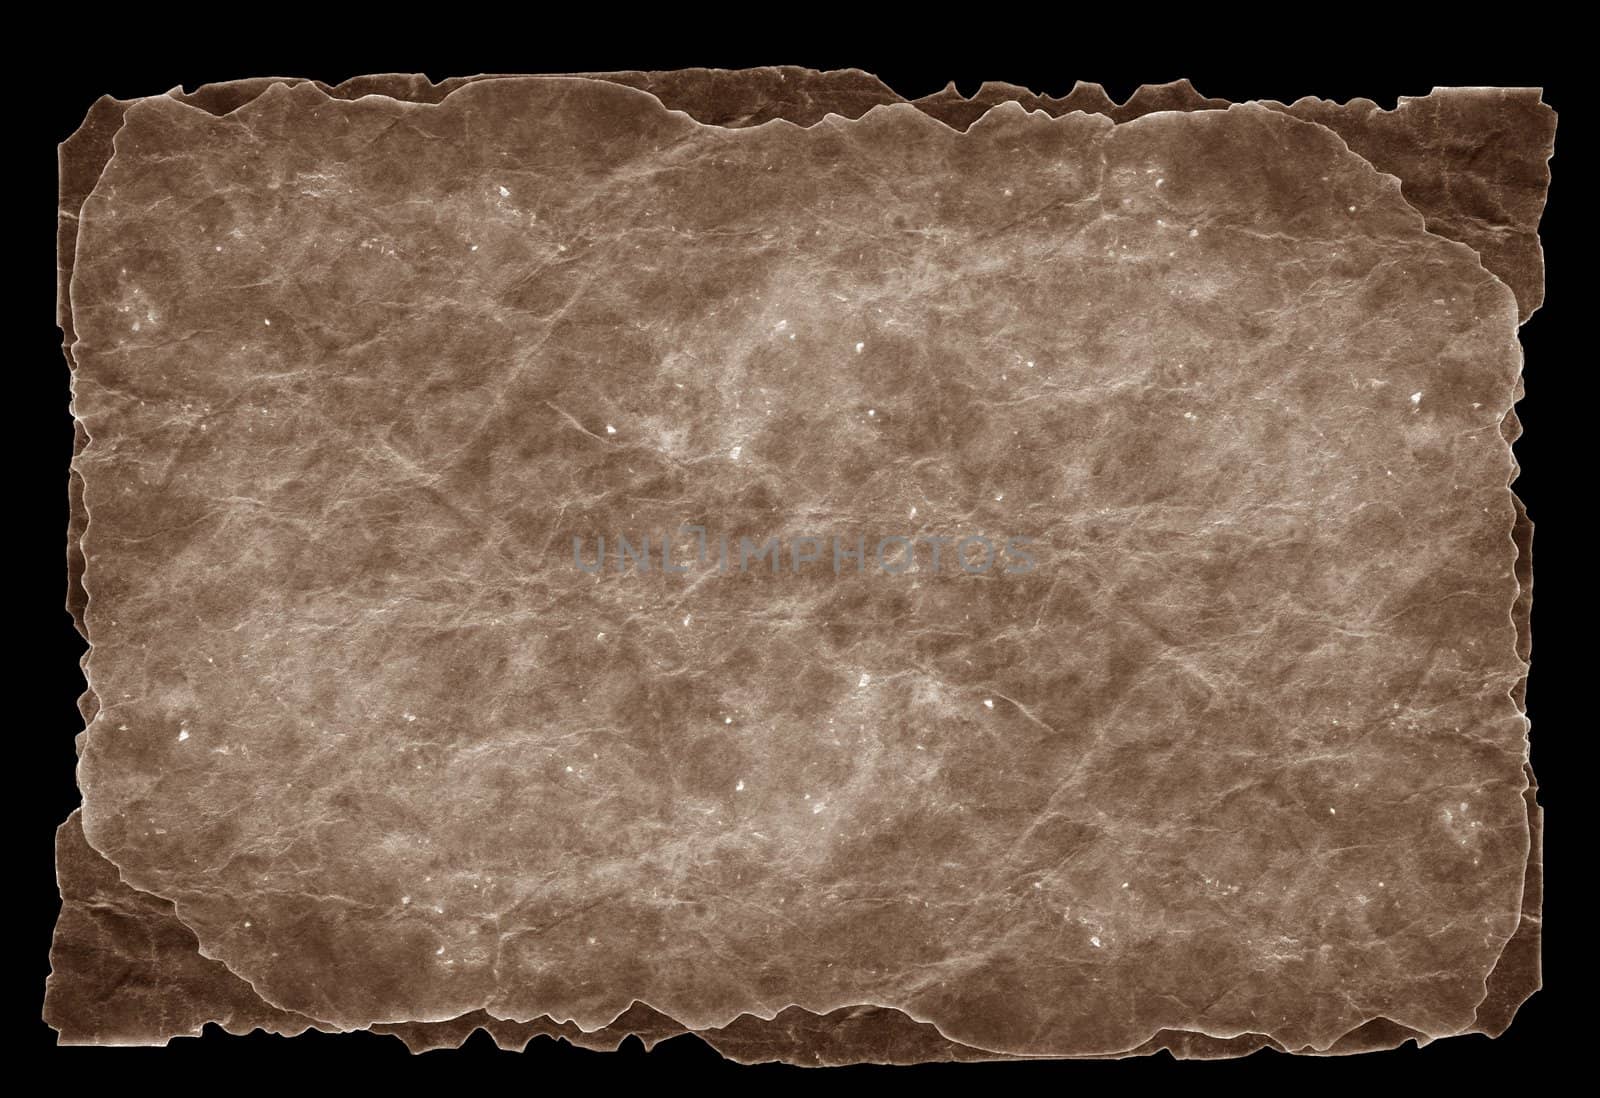 Highly detailed textured antique paper with burned edges studio isolated on white . Great grunge background for your projects. More images like this in my portfolio